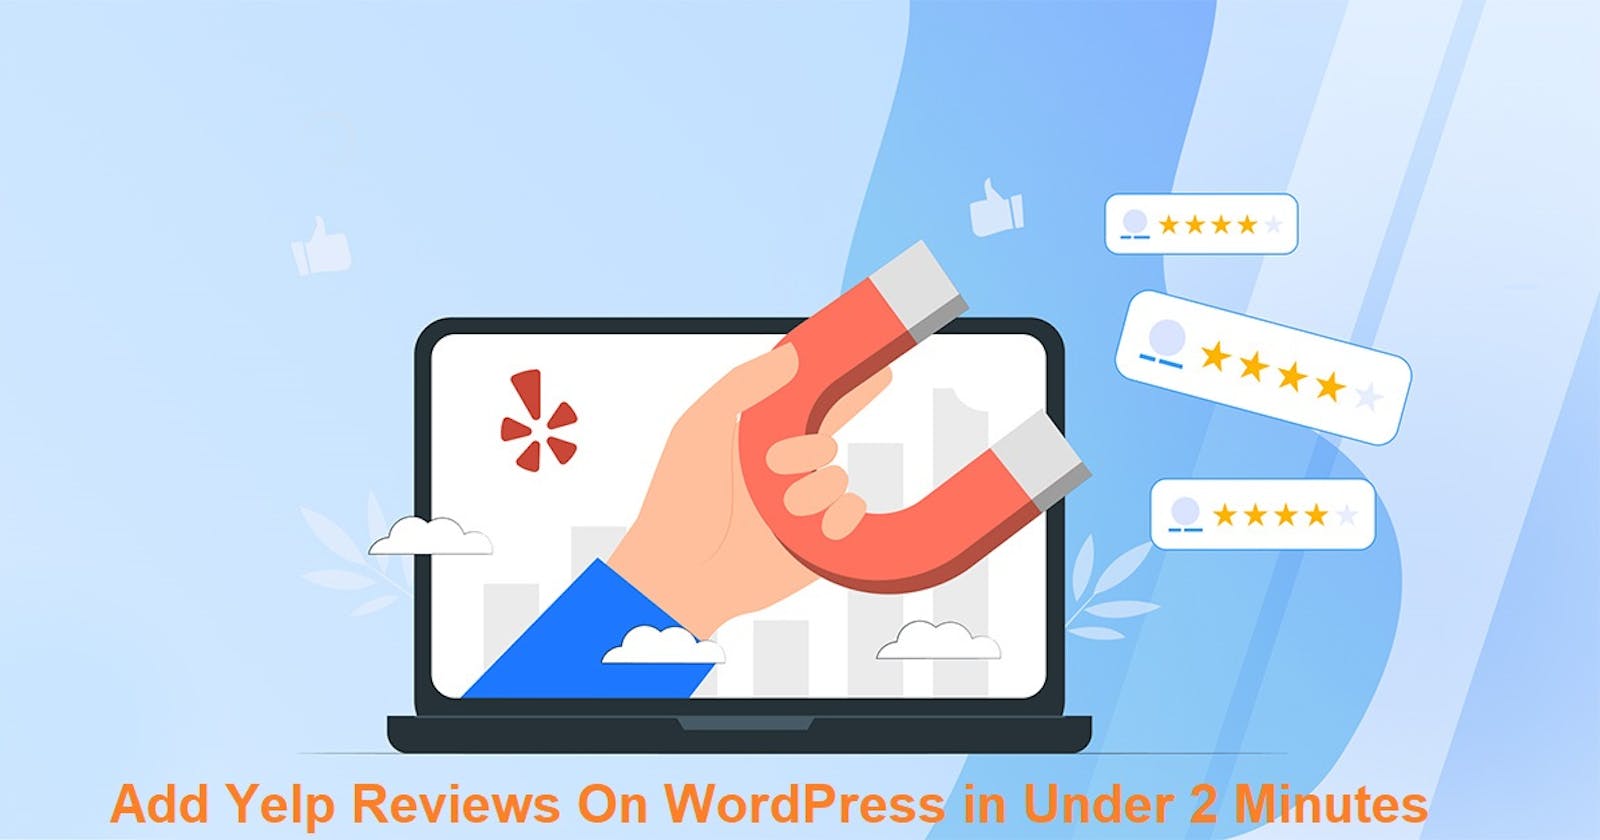 Add Yelp Reviews On WordPress in Under 2 Minutes